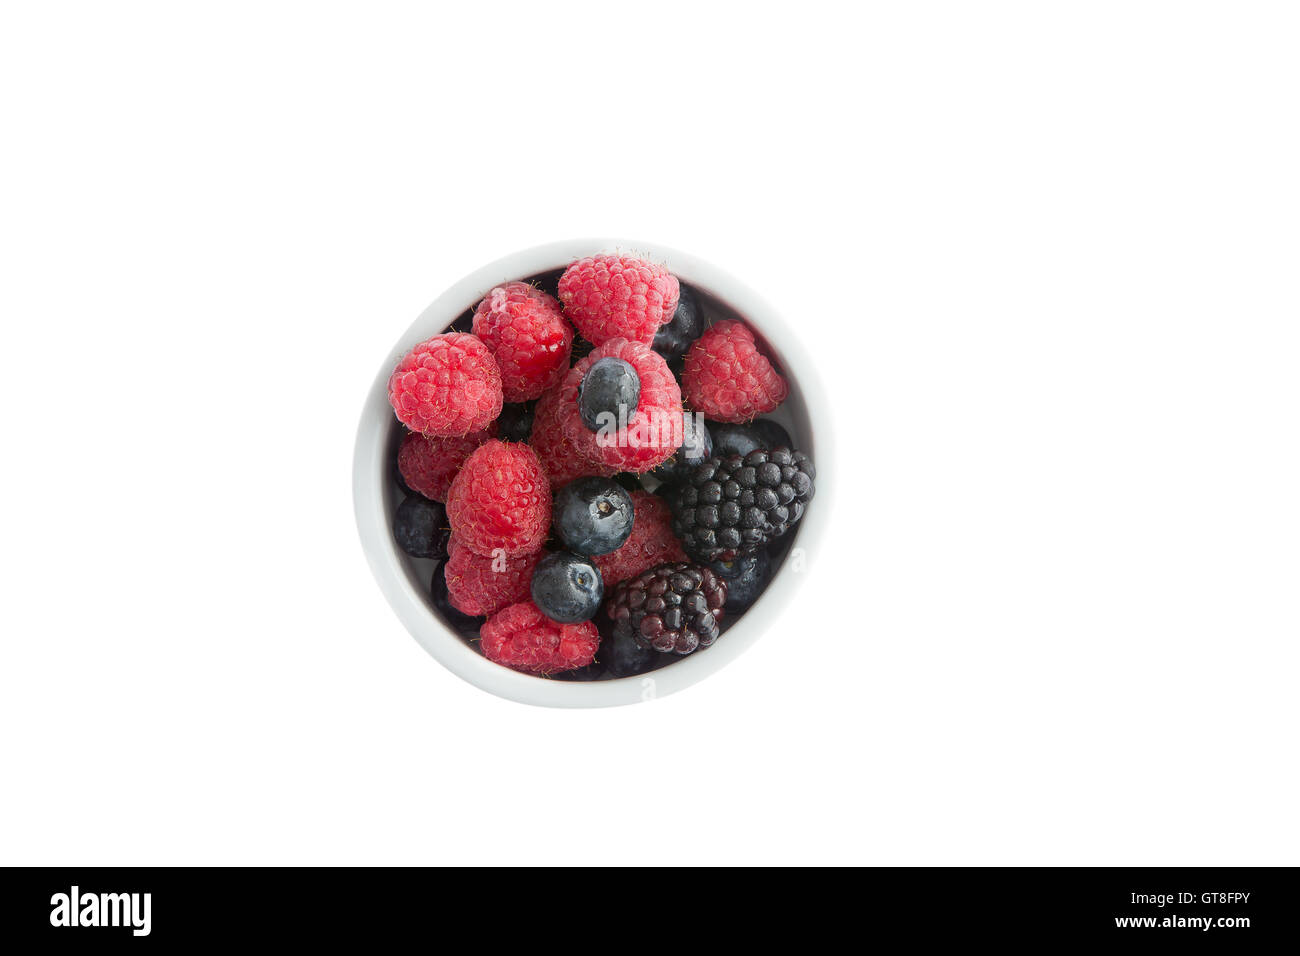 Ramekin of fresh fall or autumn berries with whole juicy ripe blueberries, blackberries and raspberries for a healthy breakfast, Stock Photo